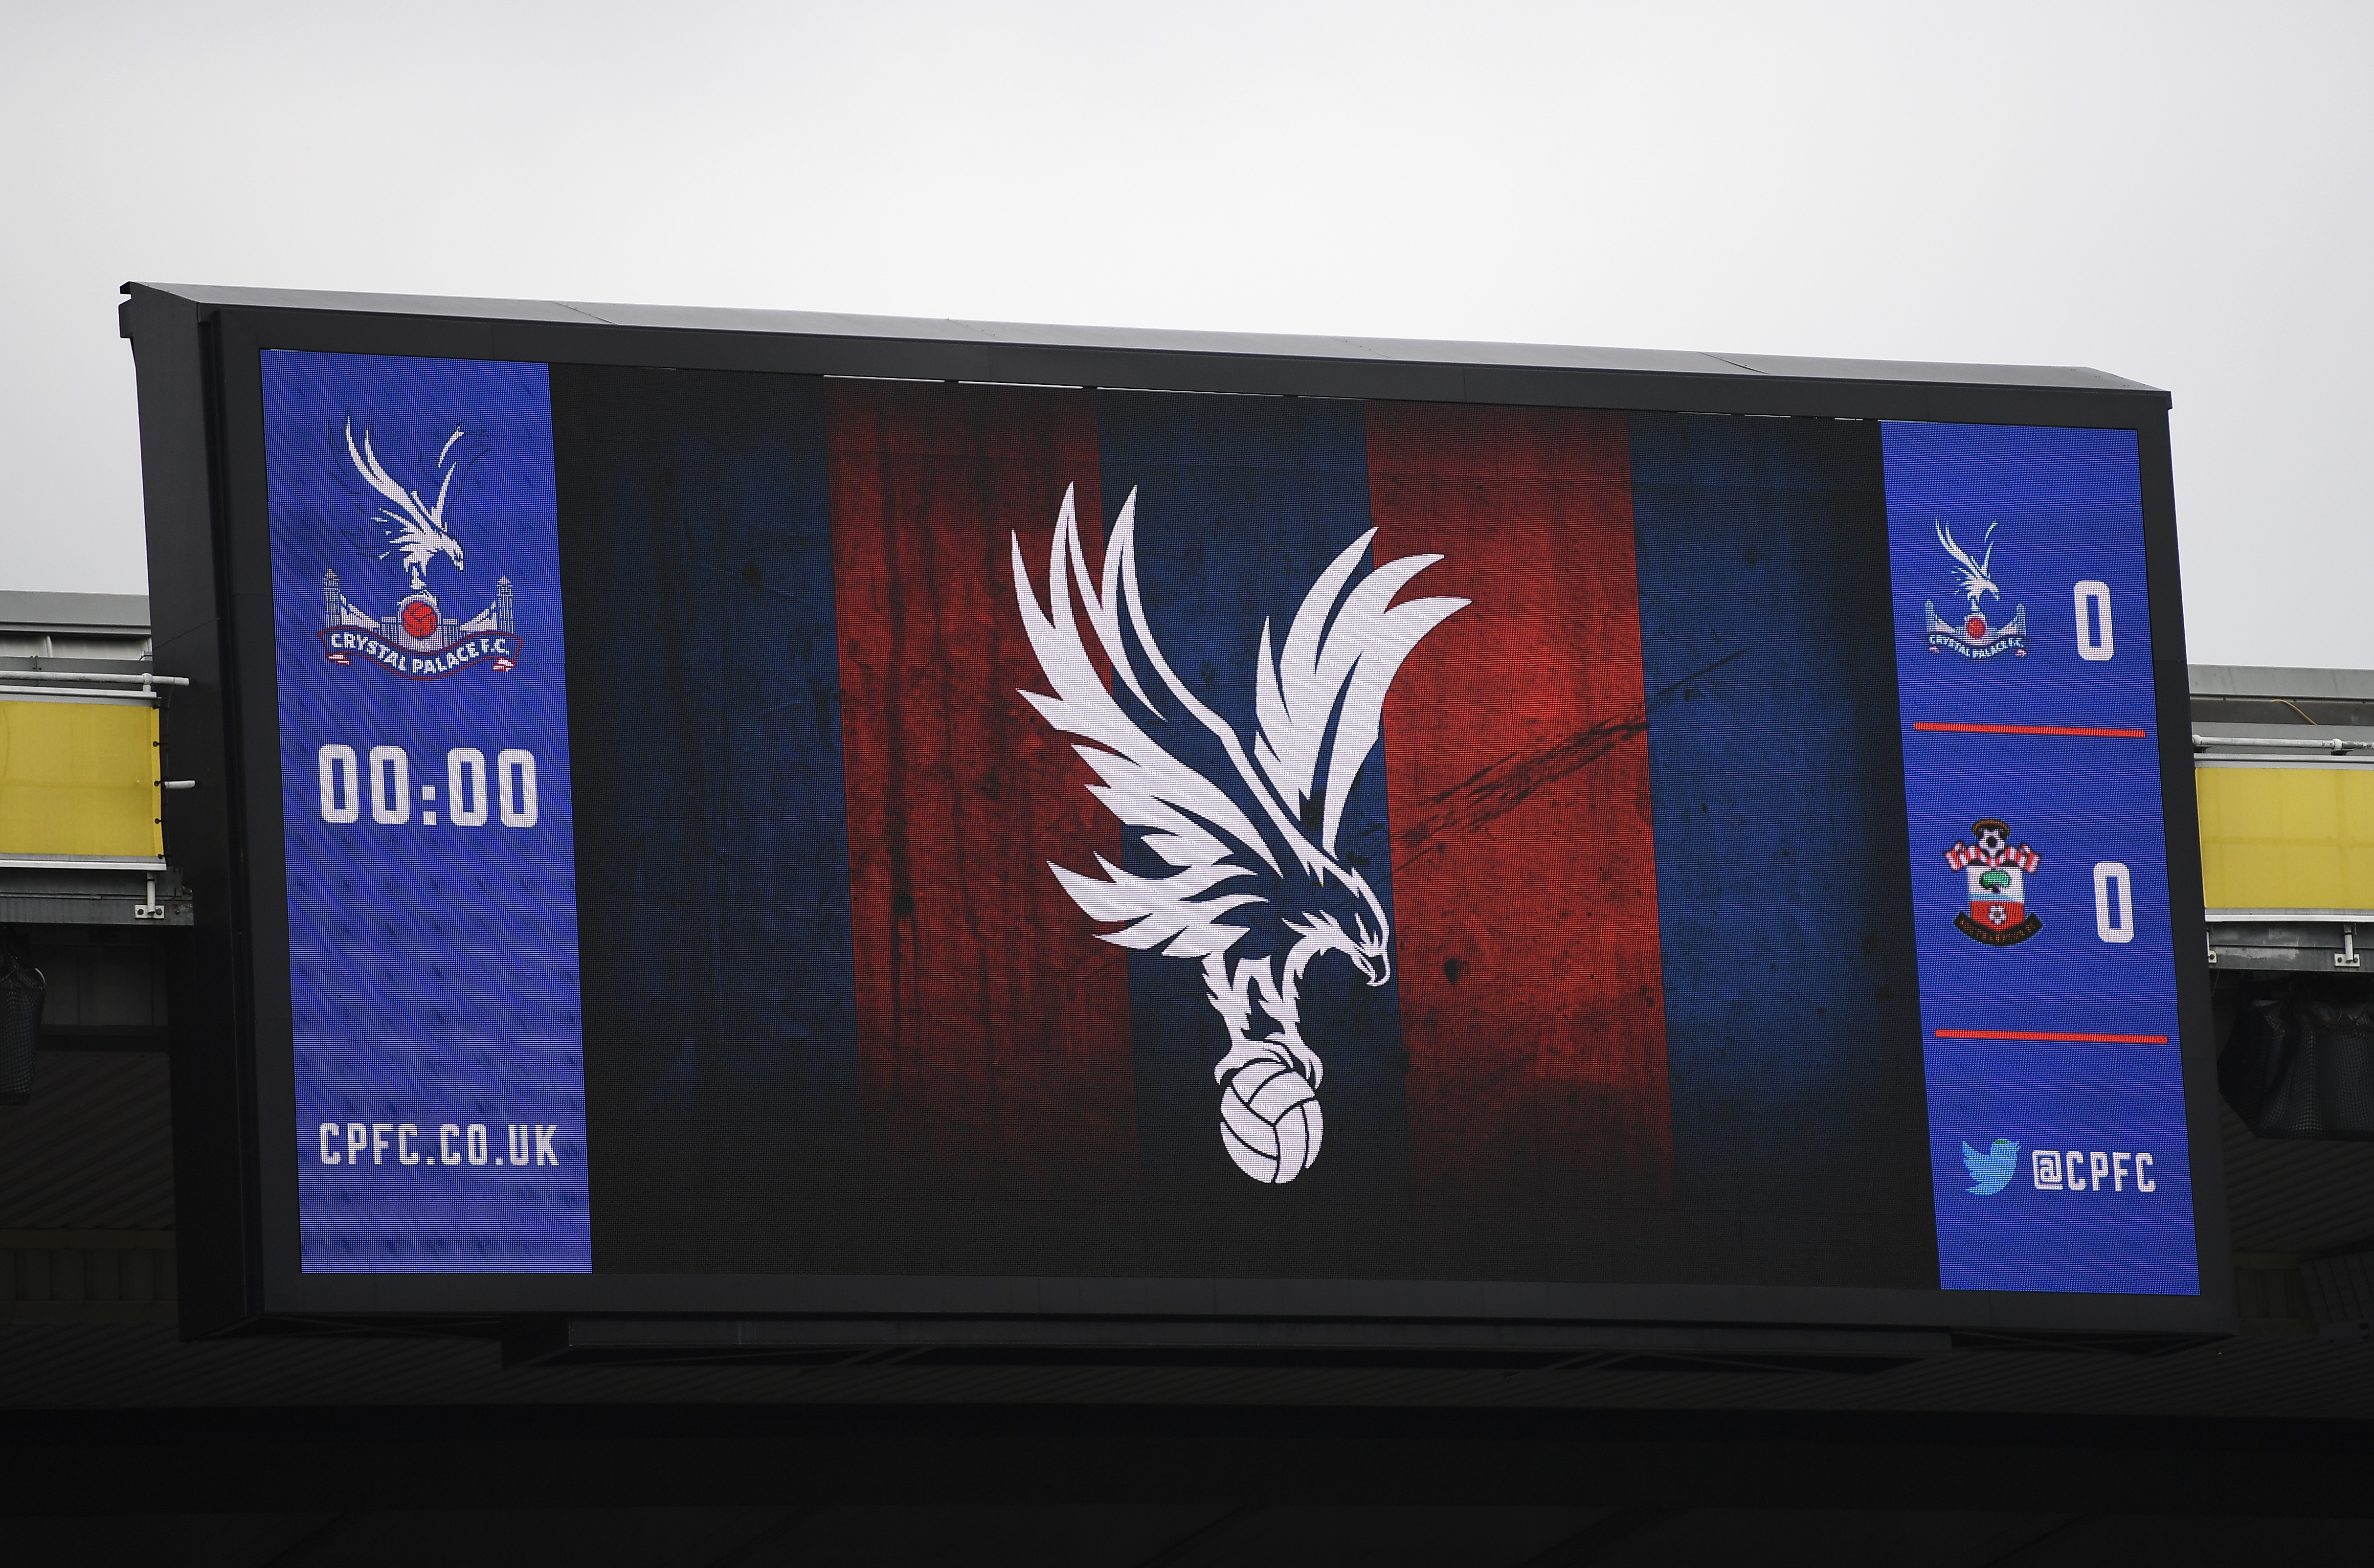 LONDON, ENGLAND - SEPTEMBER 16: A general view of the the LED screen inside the stadium prior to the Premier League match between Crystal Palace and Southampton at Selhurst Park on September 16, 2017 in London, England.  (Photo by Mike Hewitt/Getty Images)